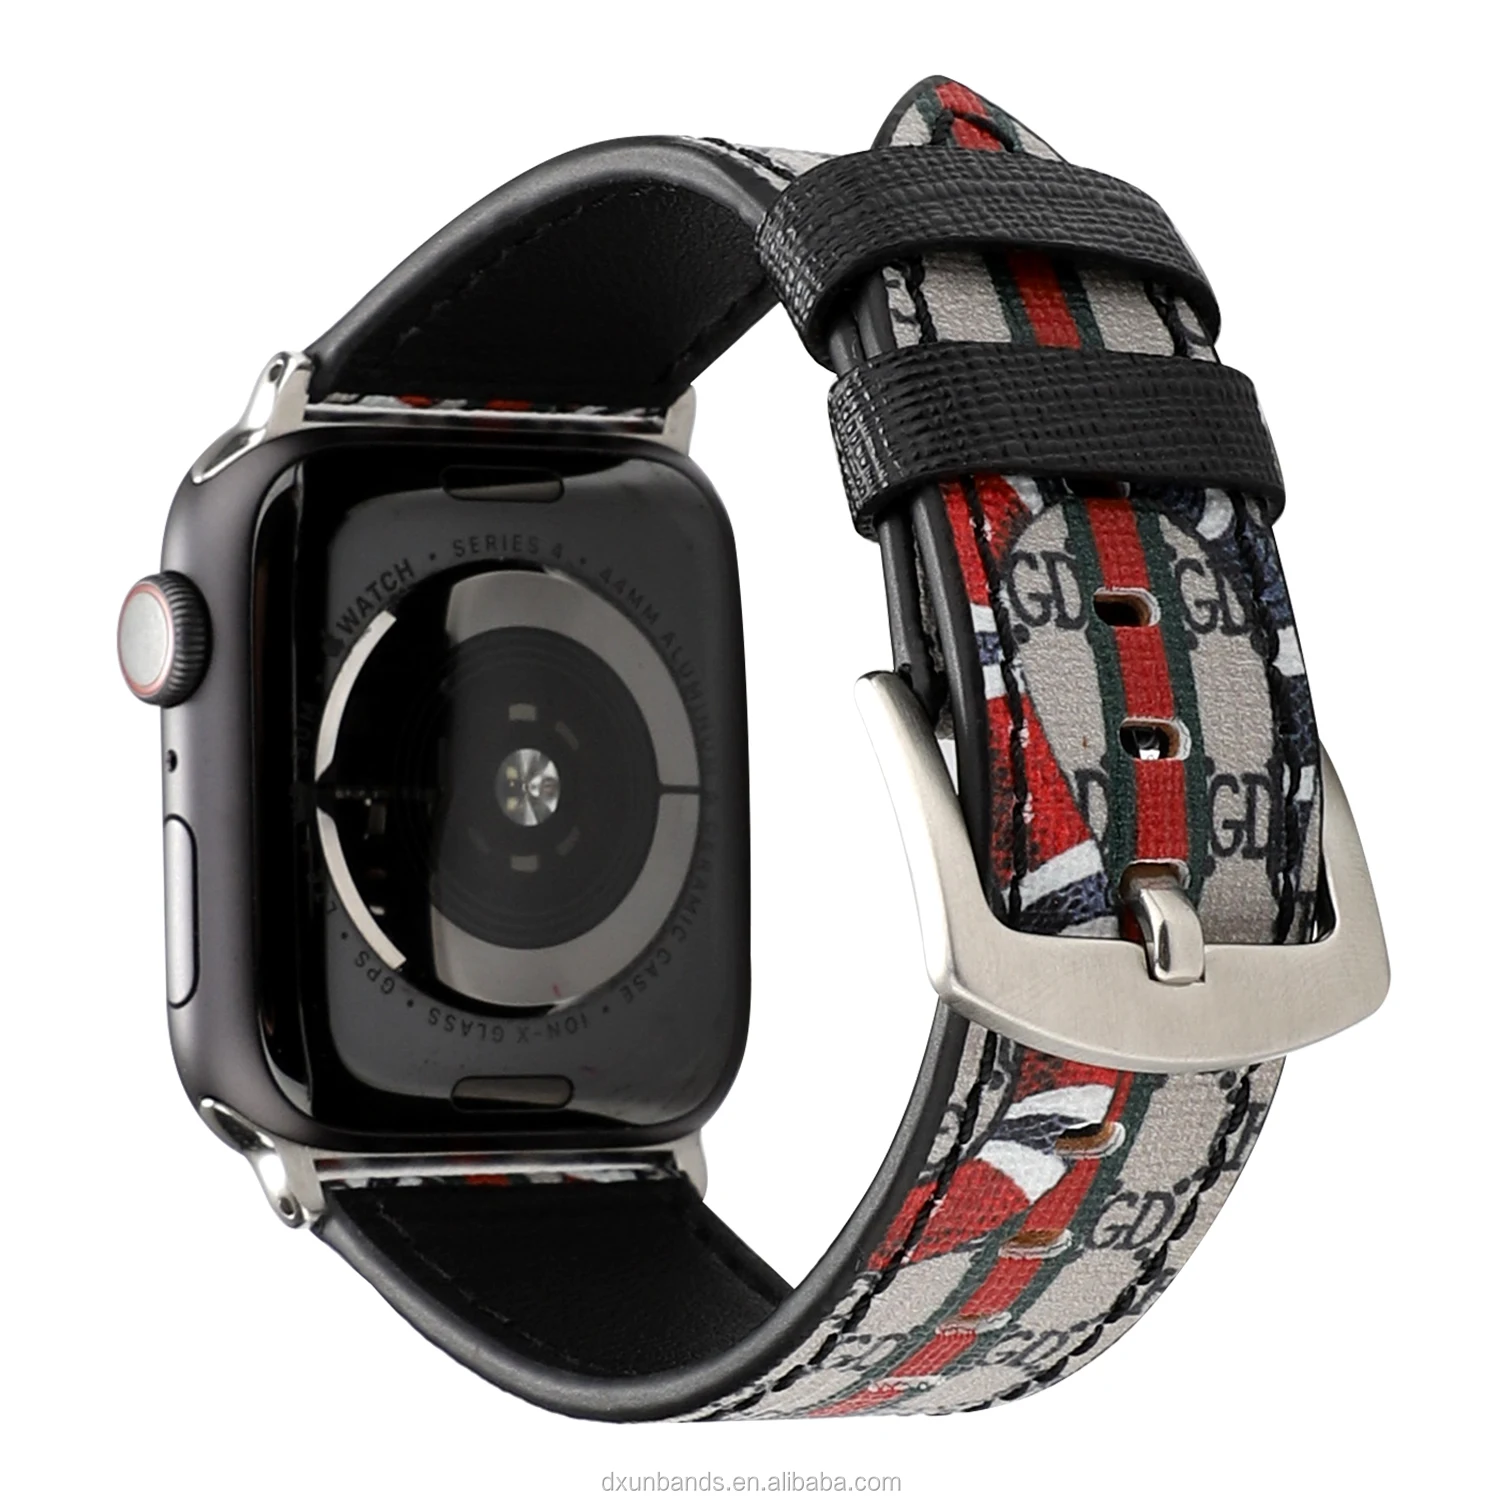 

2019 New Products for Apple Watch Band 44mm 40mm Genuine Leather Kingsnake Pattern Leather Tatoo Strap for iwatch Series 4, Black;khaki